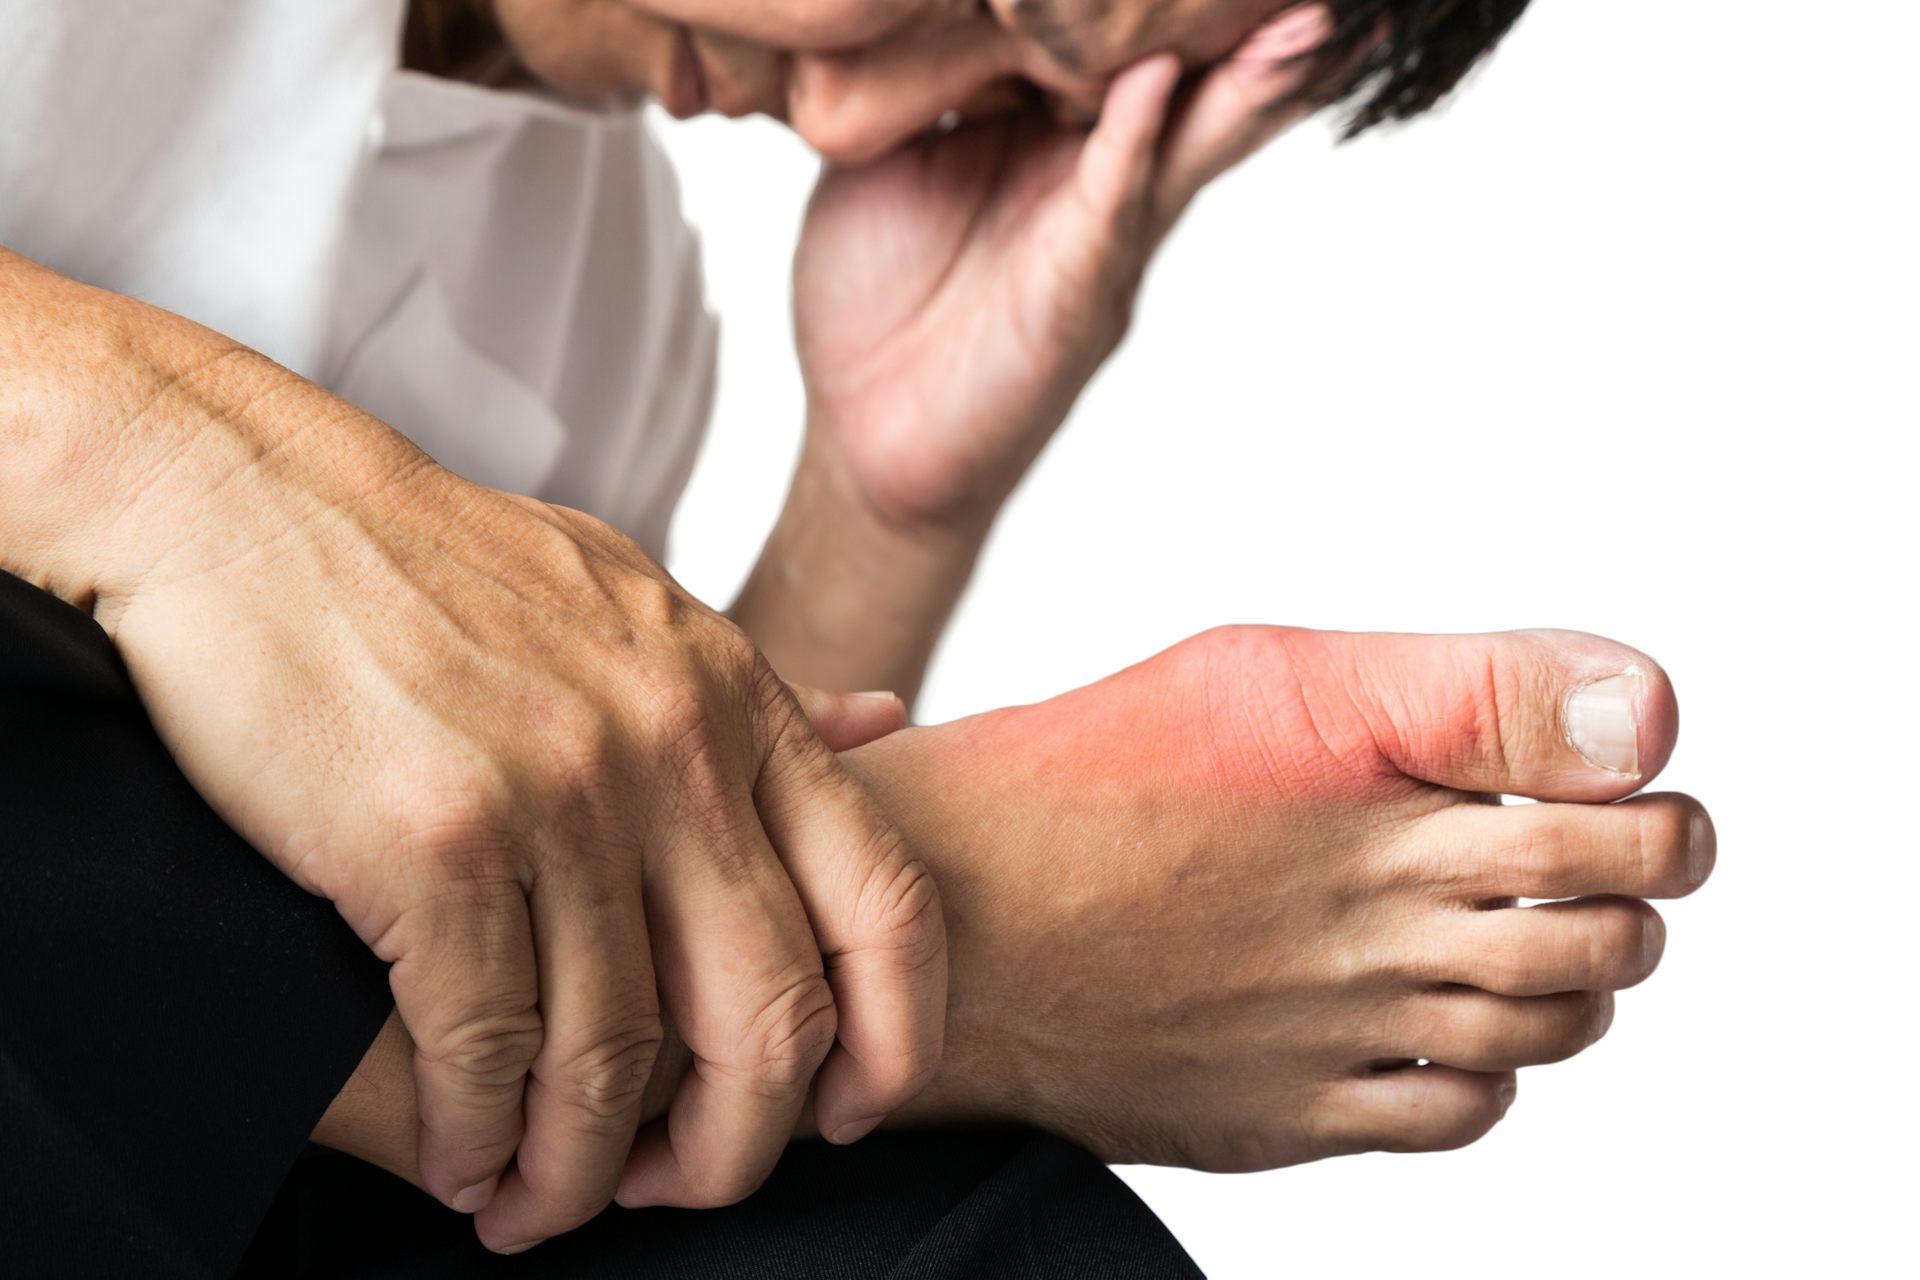 what causes gout flare ups